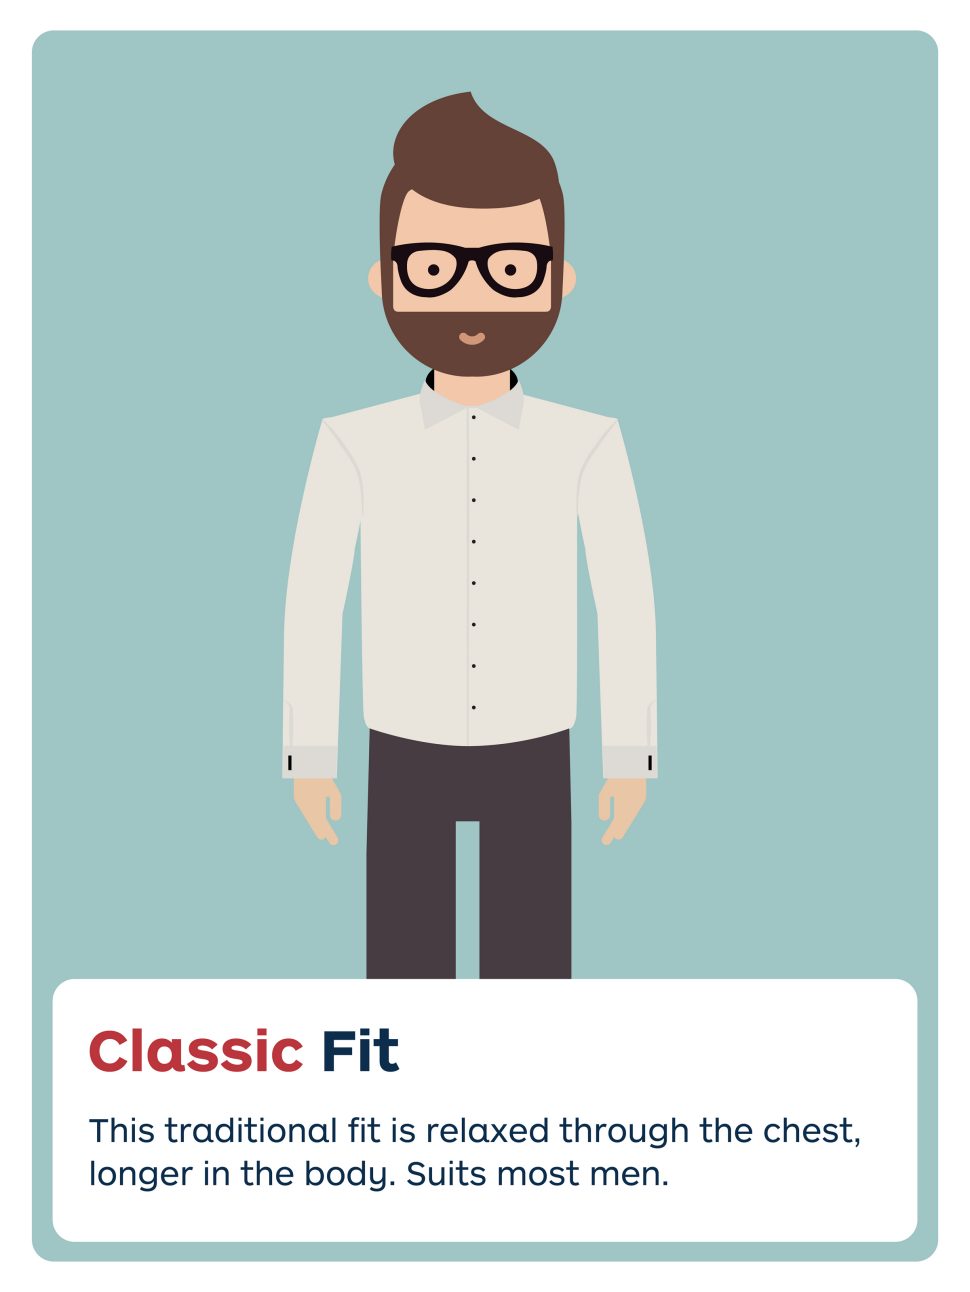 Classic fit.
This traditional fit is relaxed through the chest, longer in the body. Suits most men.